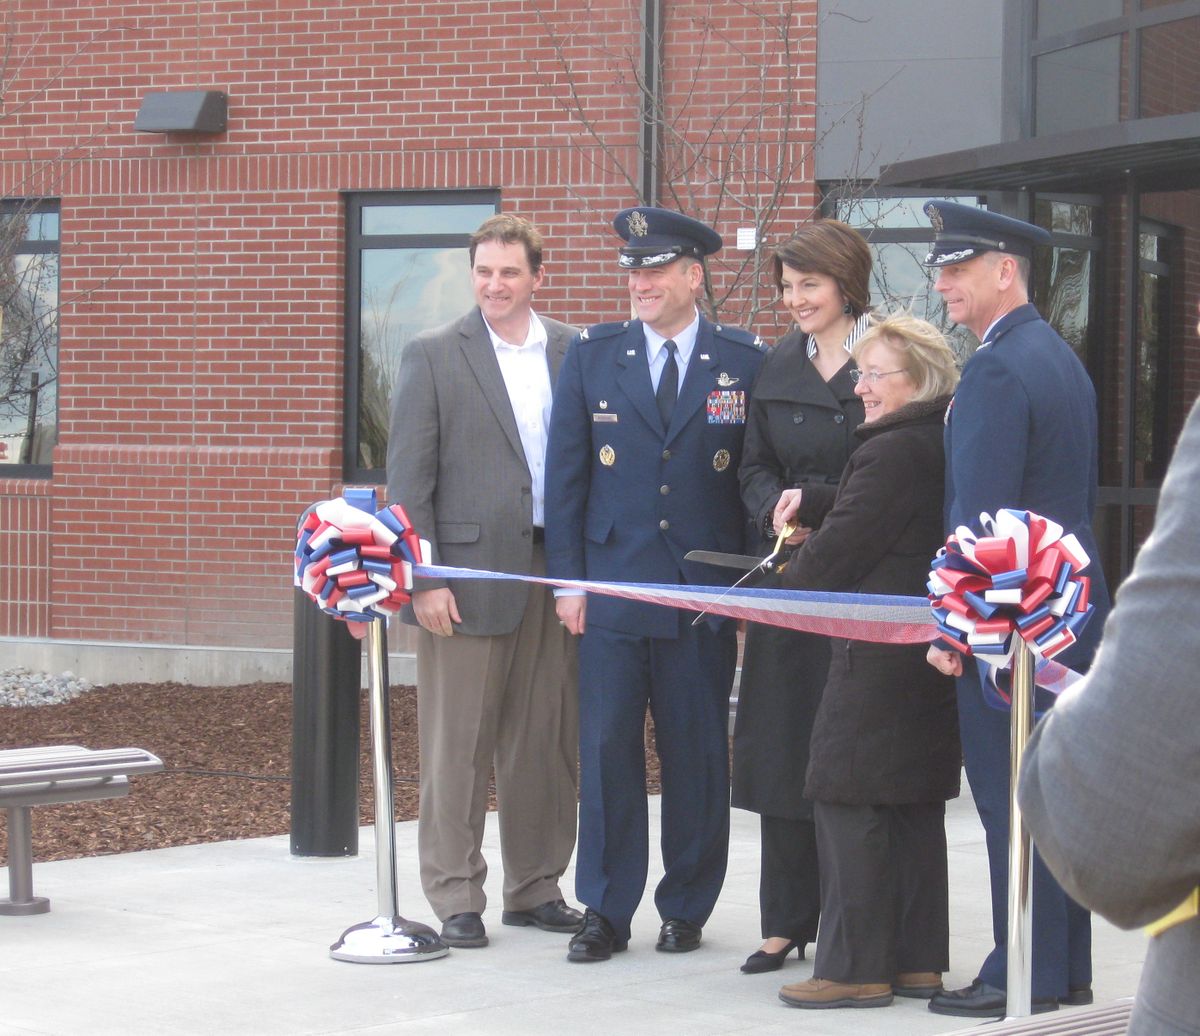 Doug Jackson of Jackson Contractor Group, Col. Brian Newberry, Congresswoman Cathy McMorris-Rodgers, Senator Patty Murray and Col. Daniel Swain cut the ribbon for the new headquarters building at Fairchild Air Force Base.  (Nina Culver)